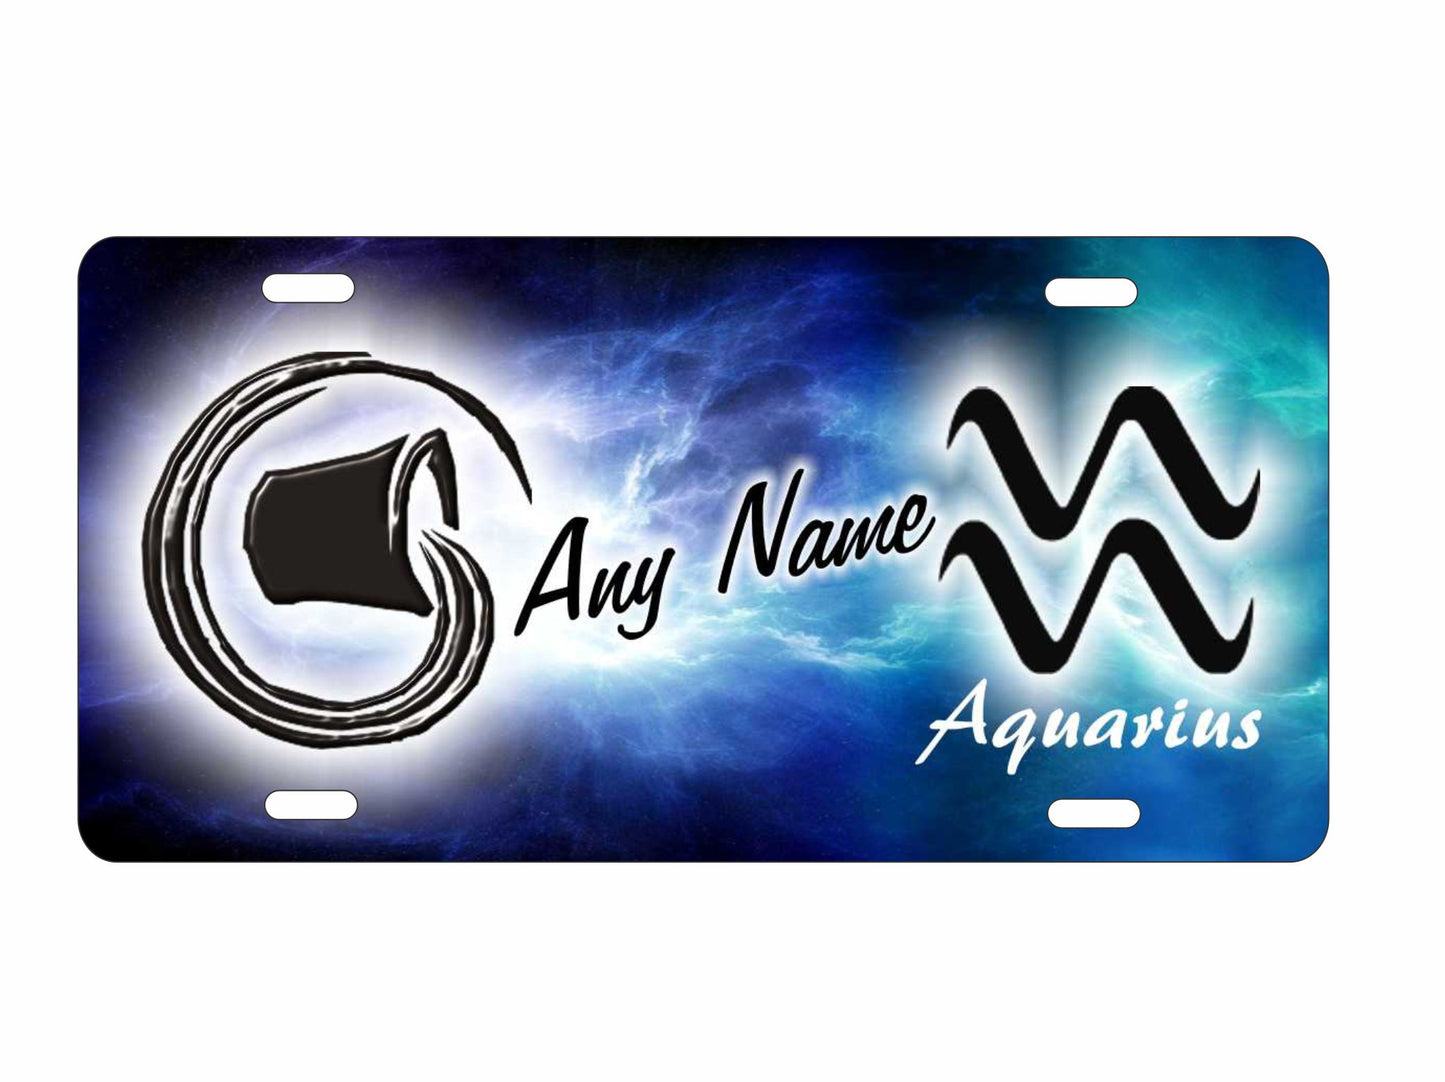 Aquarius zodiac Astrological sign personalized novelty decorative front license plate